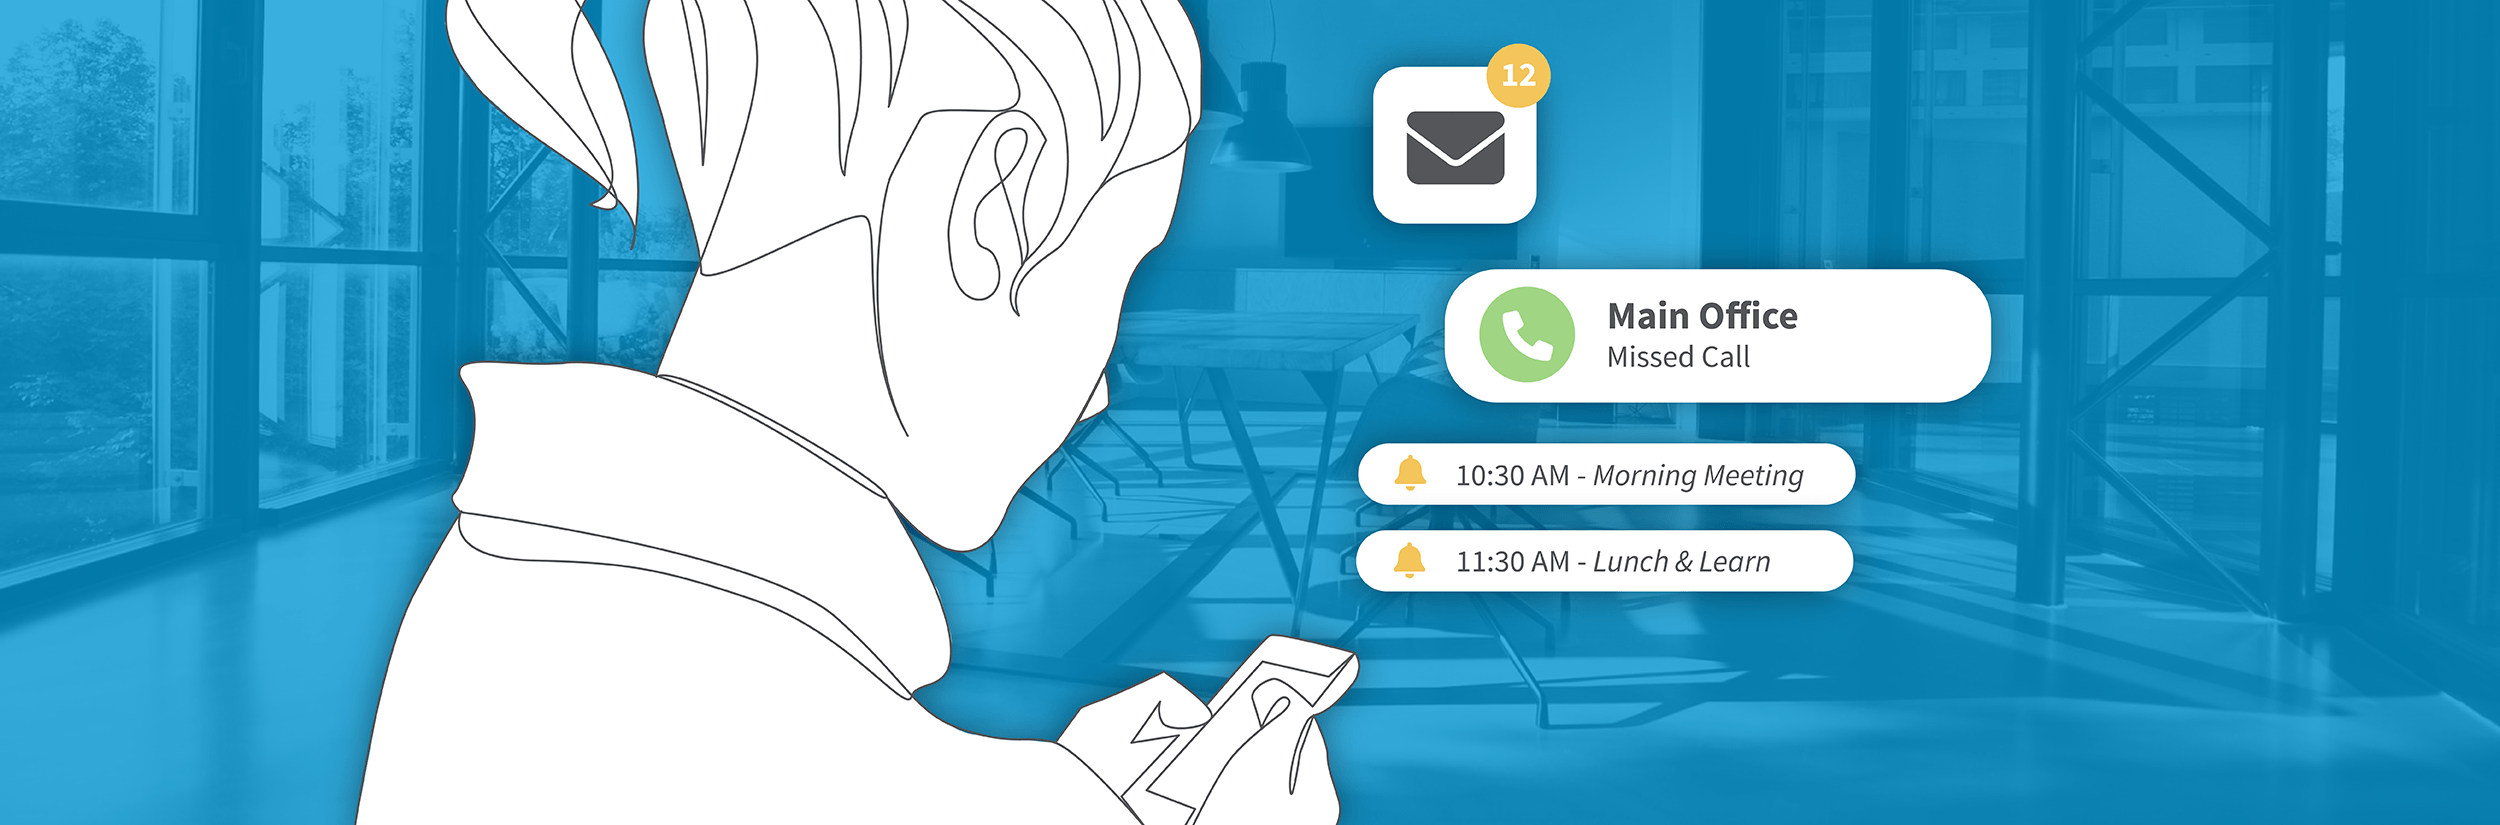 Illustration of a business owner looking at phone with meeting, missed call, and email notifications